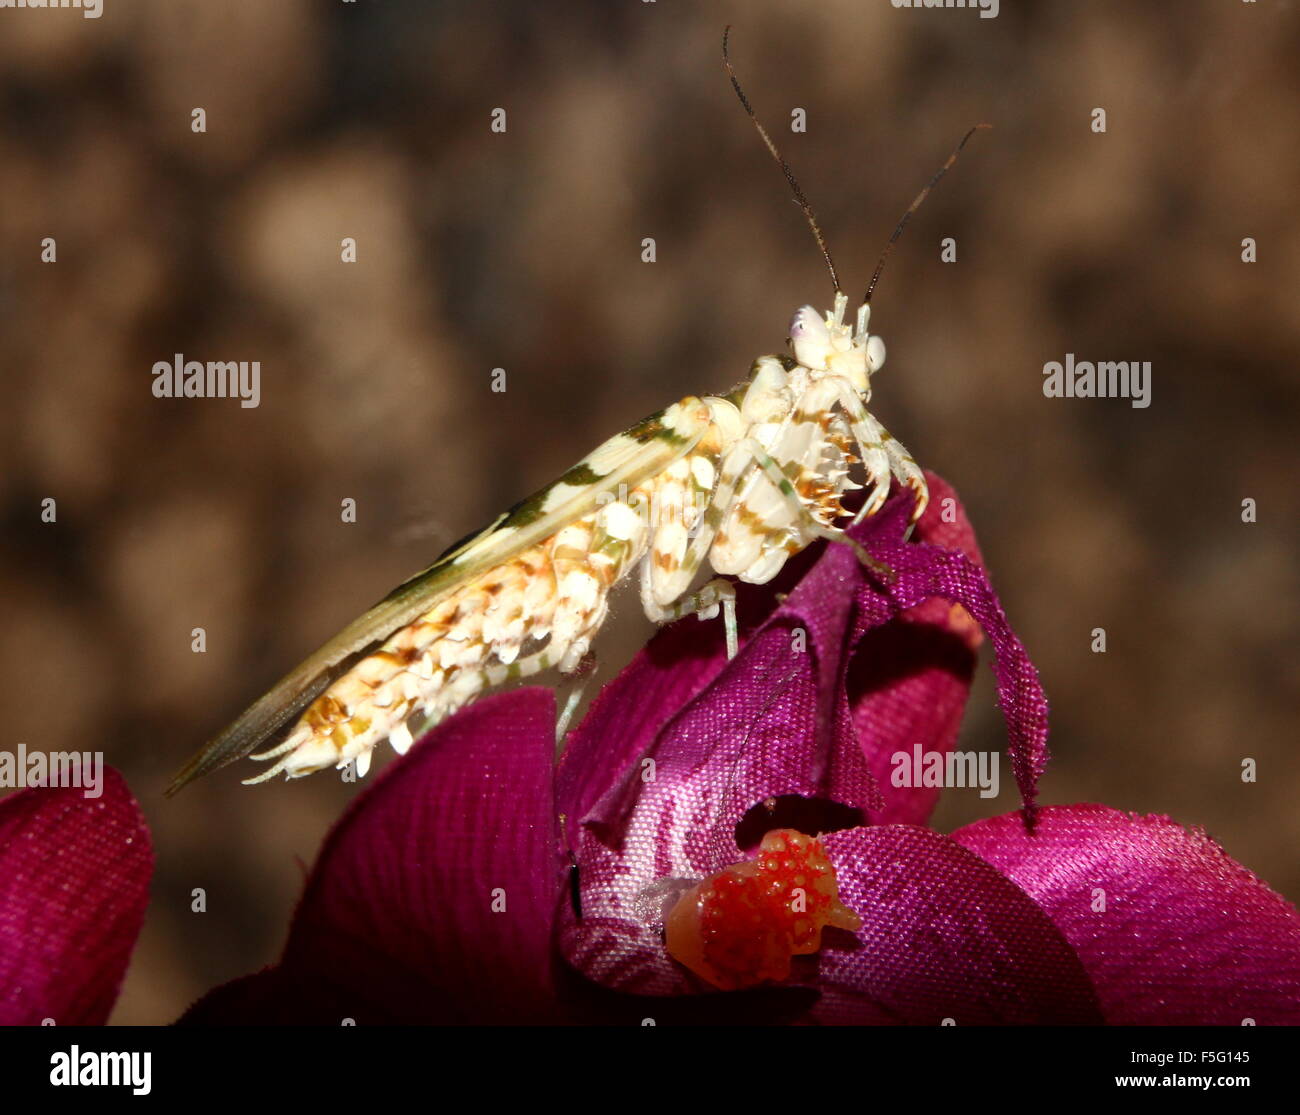 East African Spiny flower mantis (Pseudocreobotra wahlbergi) posing on an artificial (fabric) flower Stock Photo